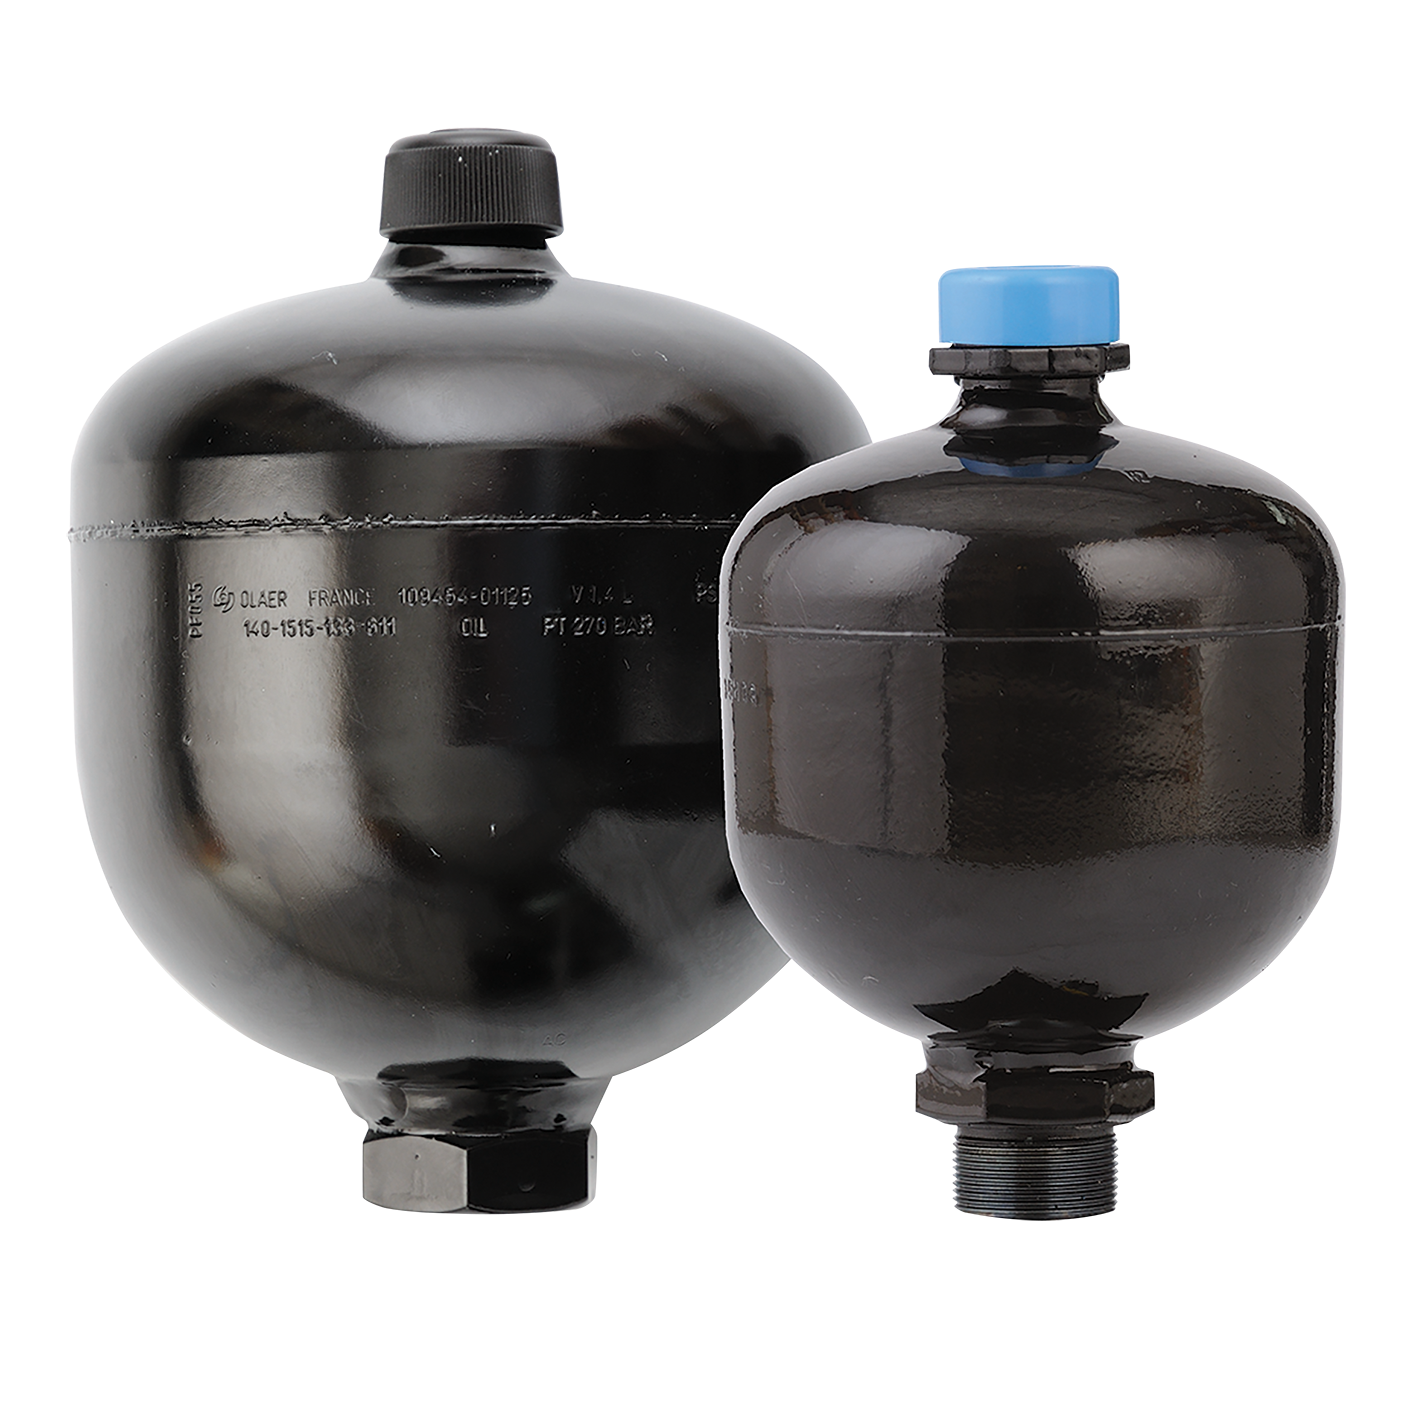 UK's Leading Suppliers of FCH DIAPHRAGM ACCUM 0.16 LITRES G1/2